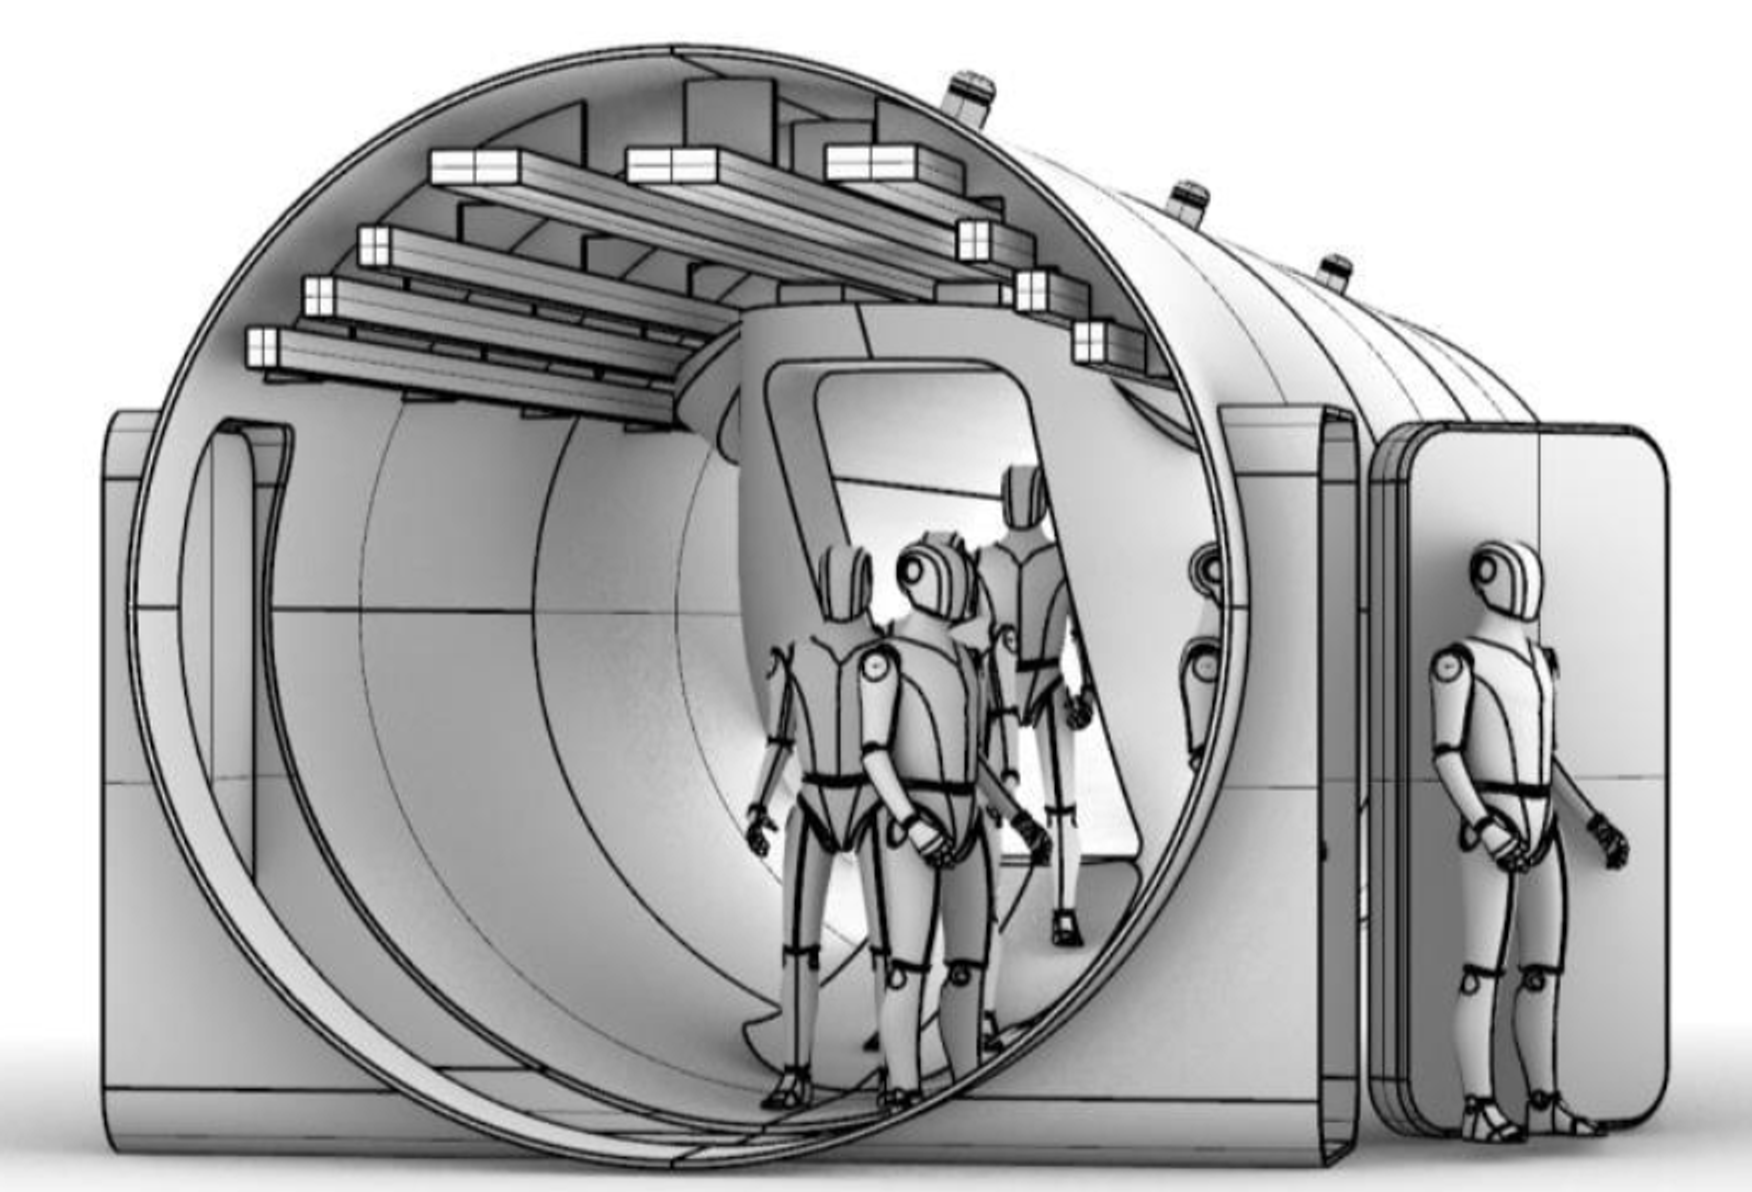 A 3D conceptual model showing the evacuation of passengers from the tube.